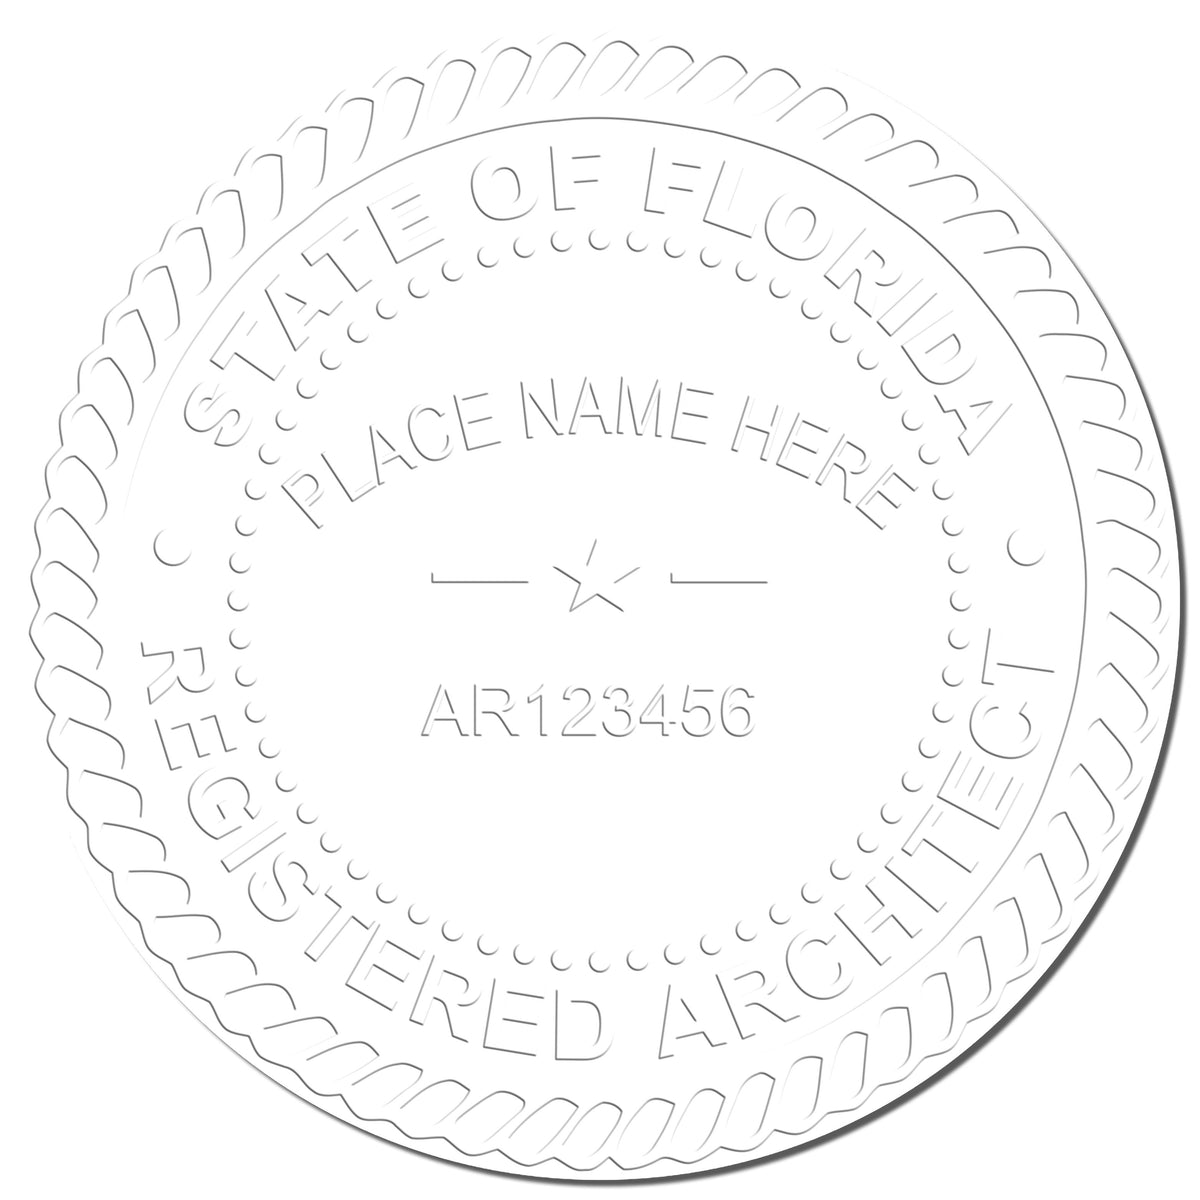 A photograph of the Florida Desk Architect Embossing Seal stamp impression reveals a vivid, professional image of the on paper.